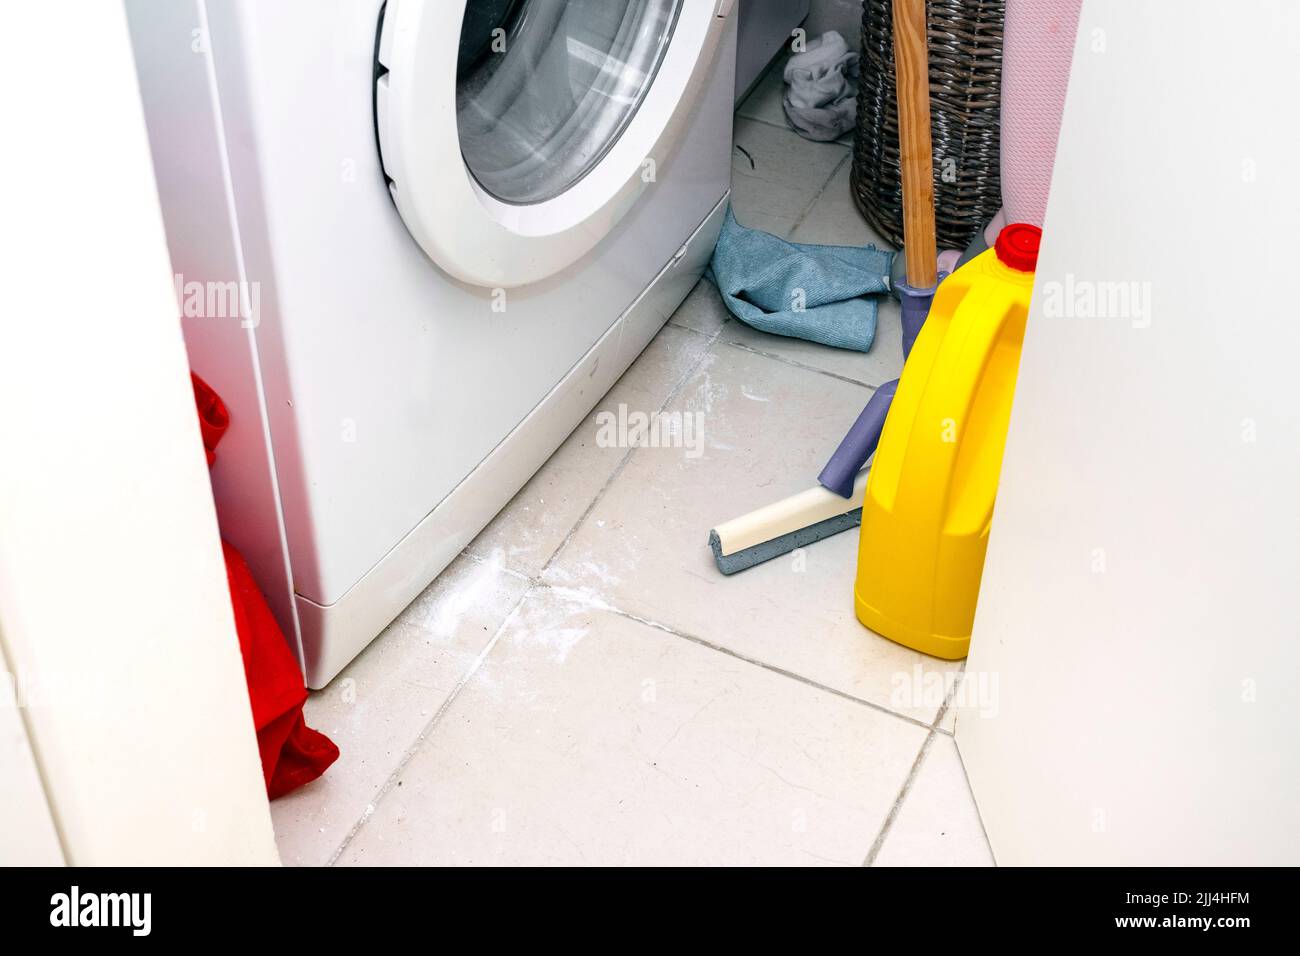 messy bathroom with spilled washing powder on the floor Stock Photo